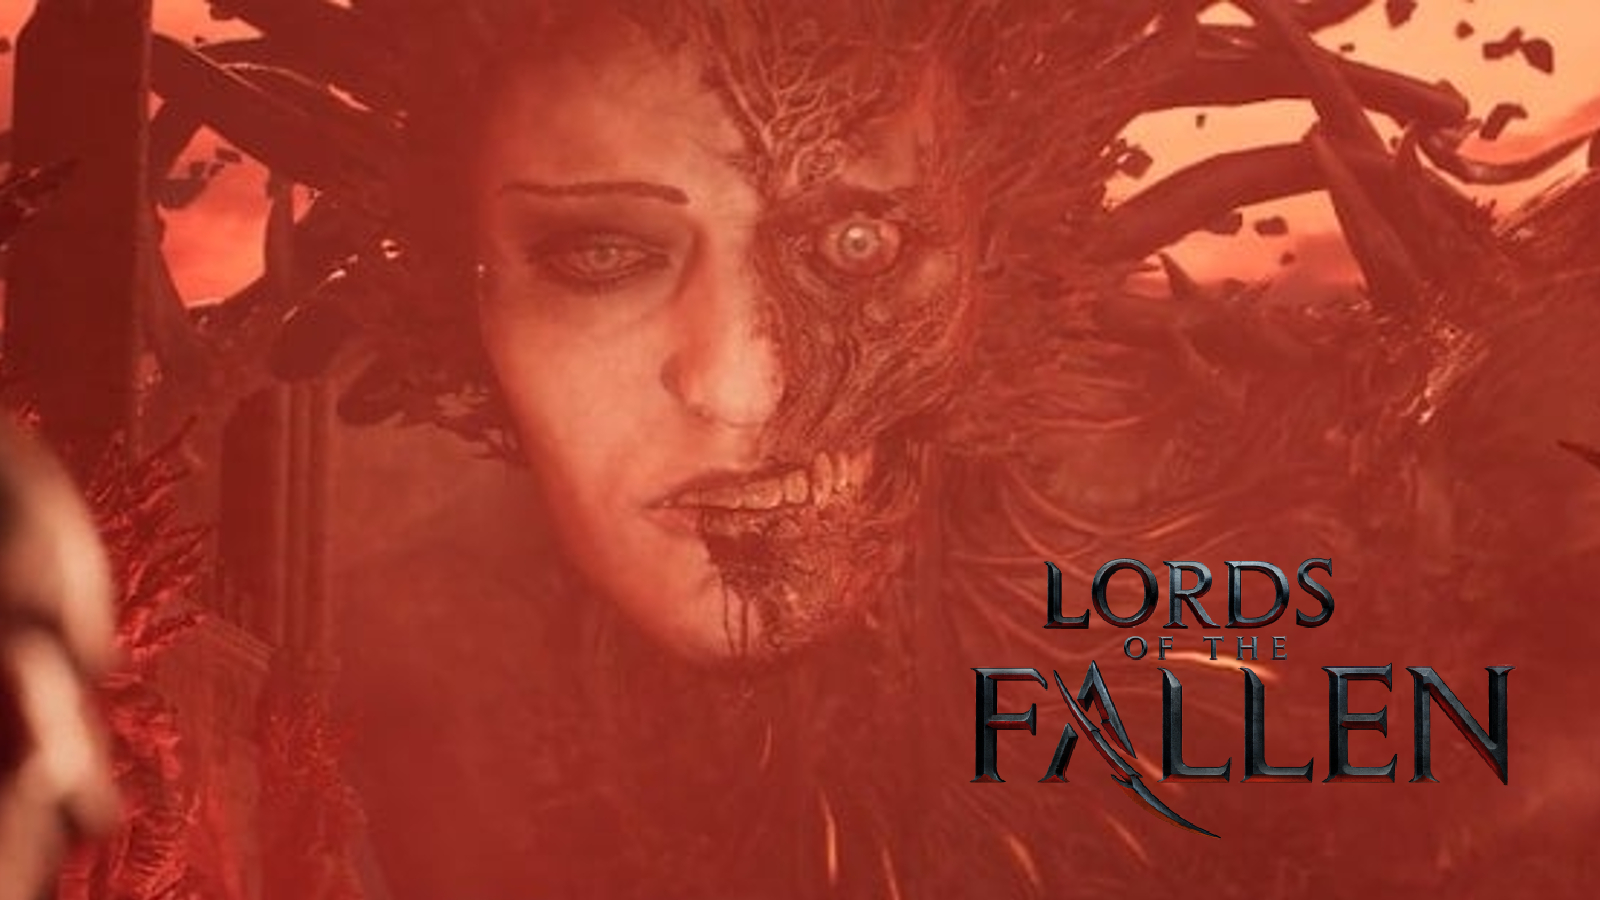 Lords of the Fallen October 14 patch notes: PC optimization, balance  changes & more - Dexerto